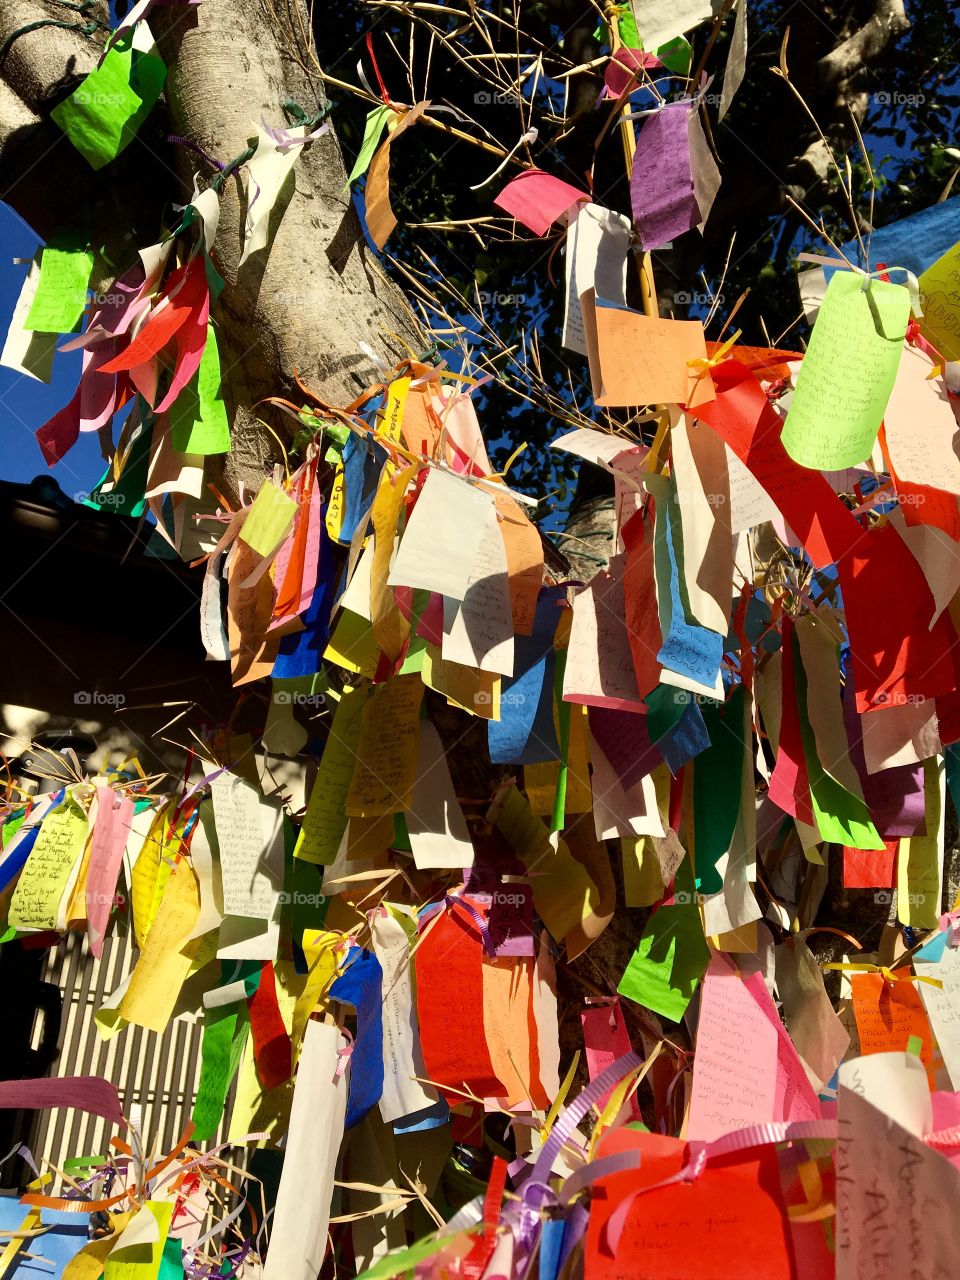 Wishes written on colorful slips of paper hang from the Wishing Tree. Japanese Village Plaza, Little Tokyo district of Los Angeles, California.